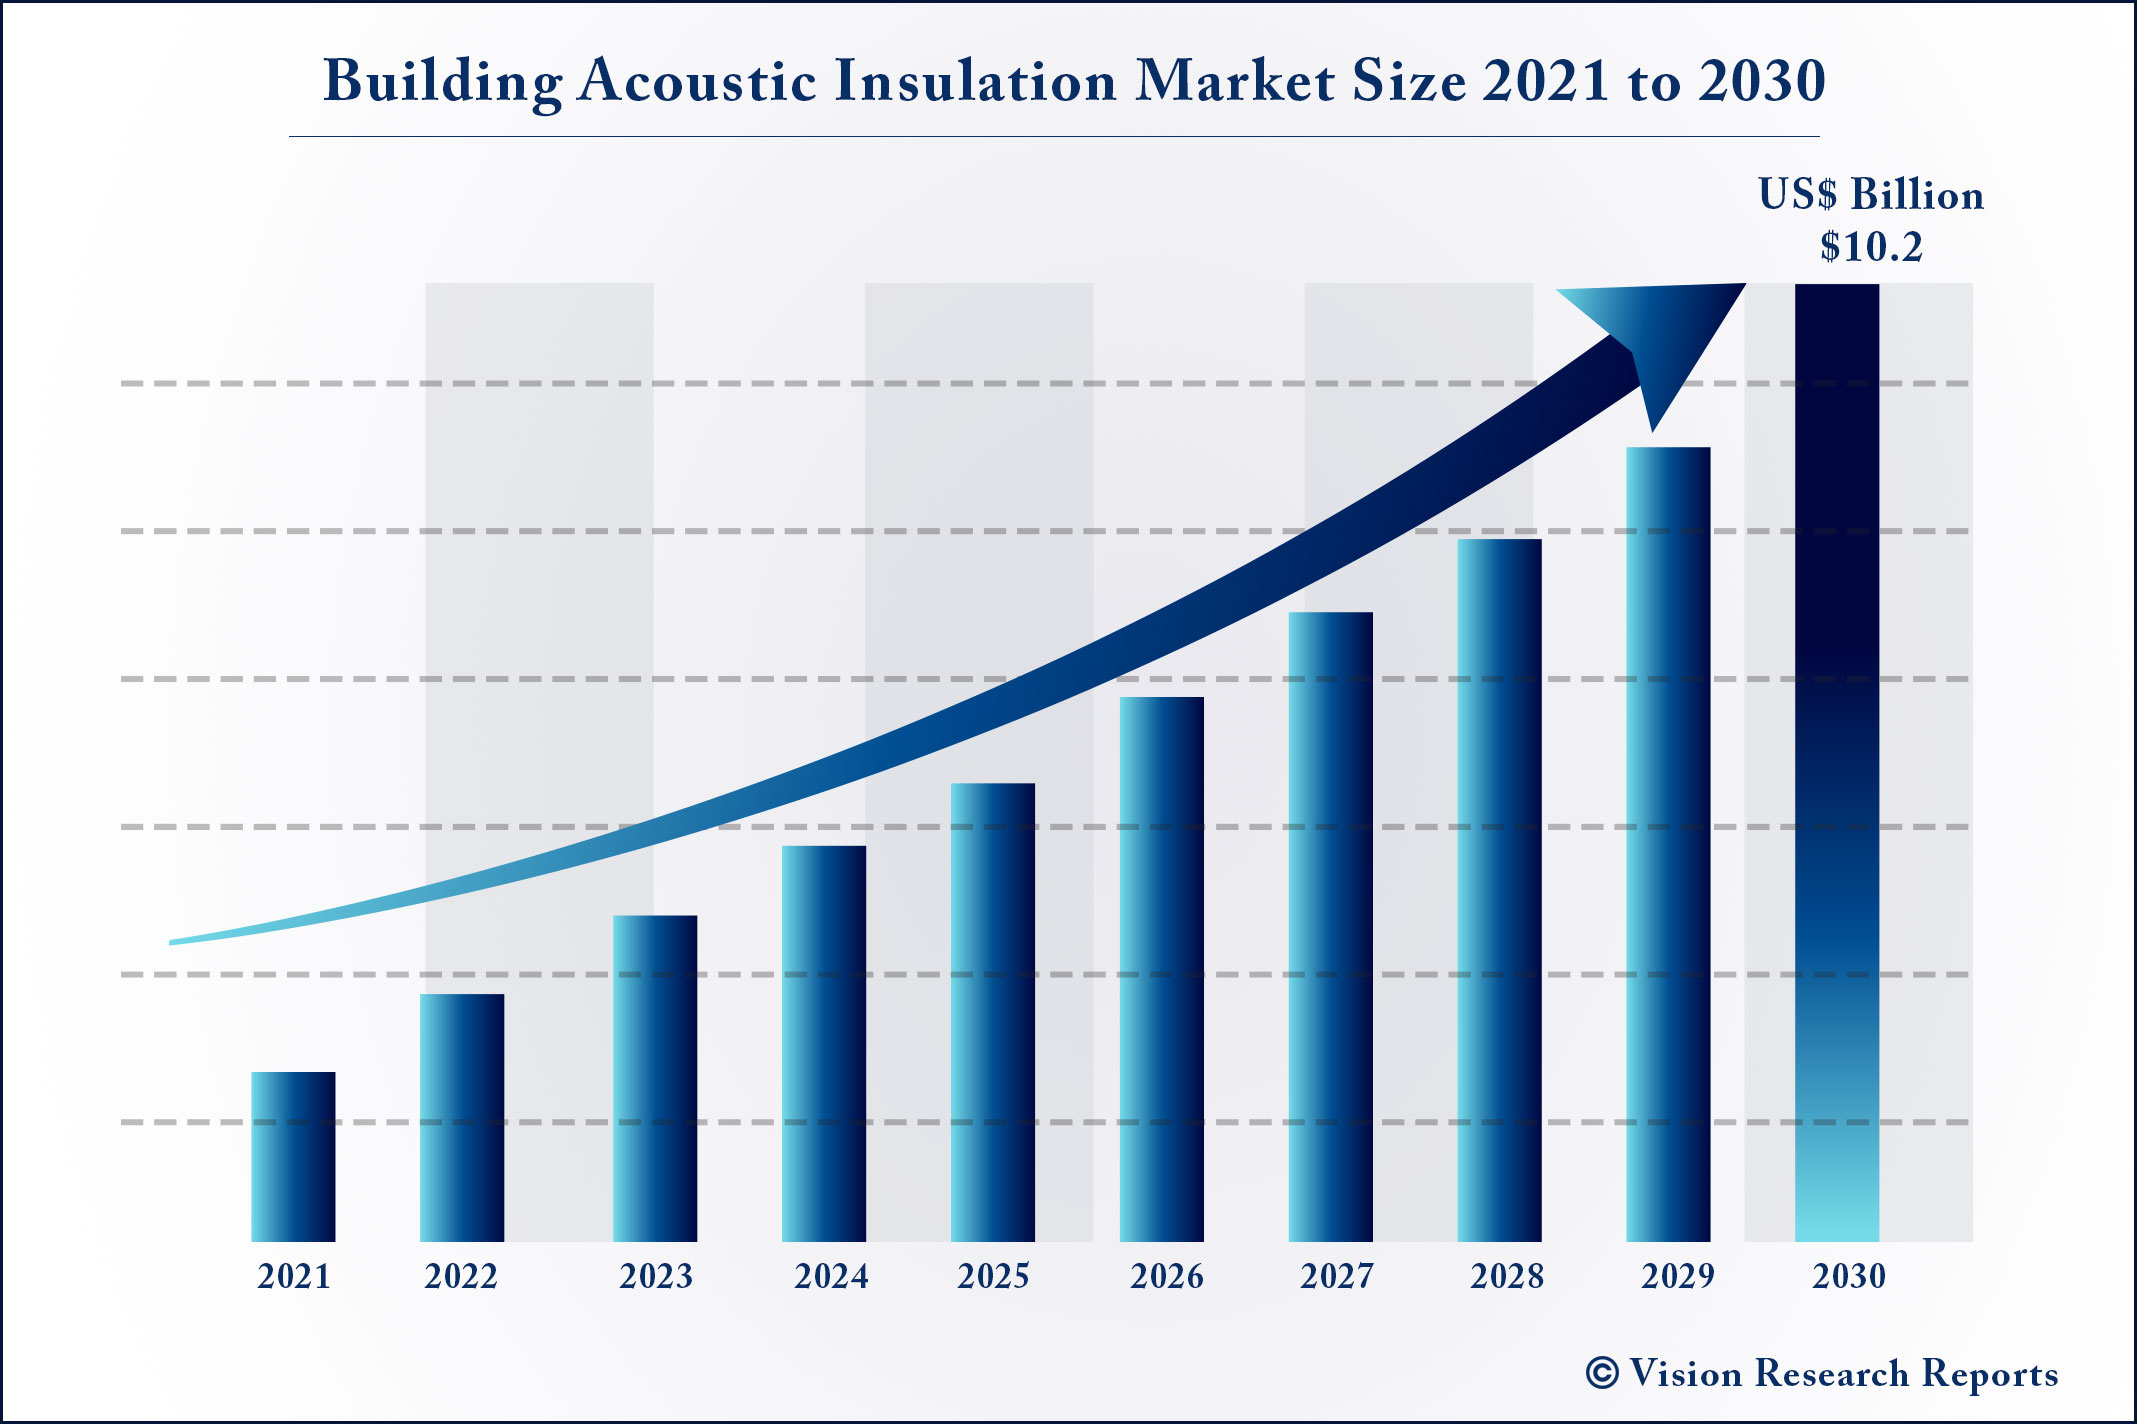 Building Acoustic Insulation Market Size 2021 to 2030